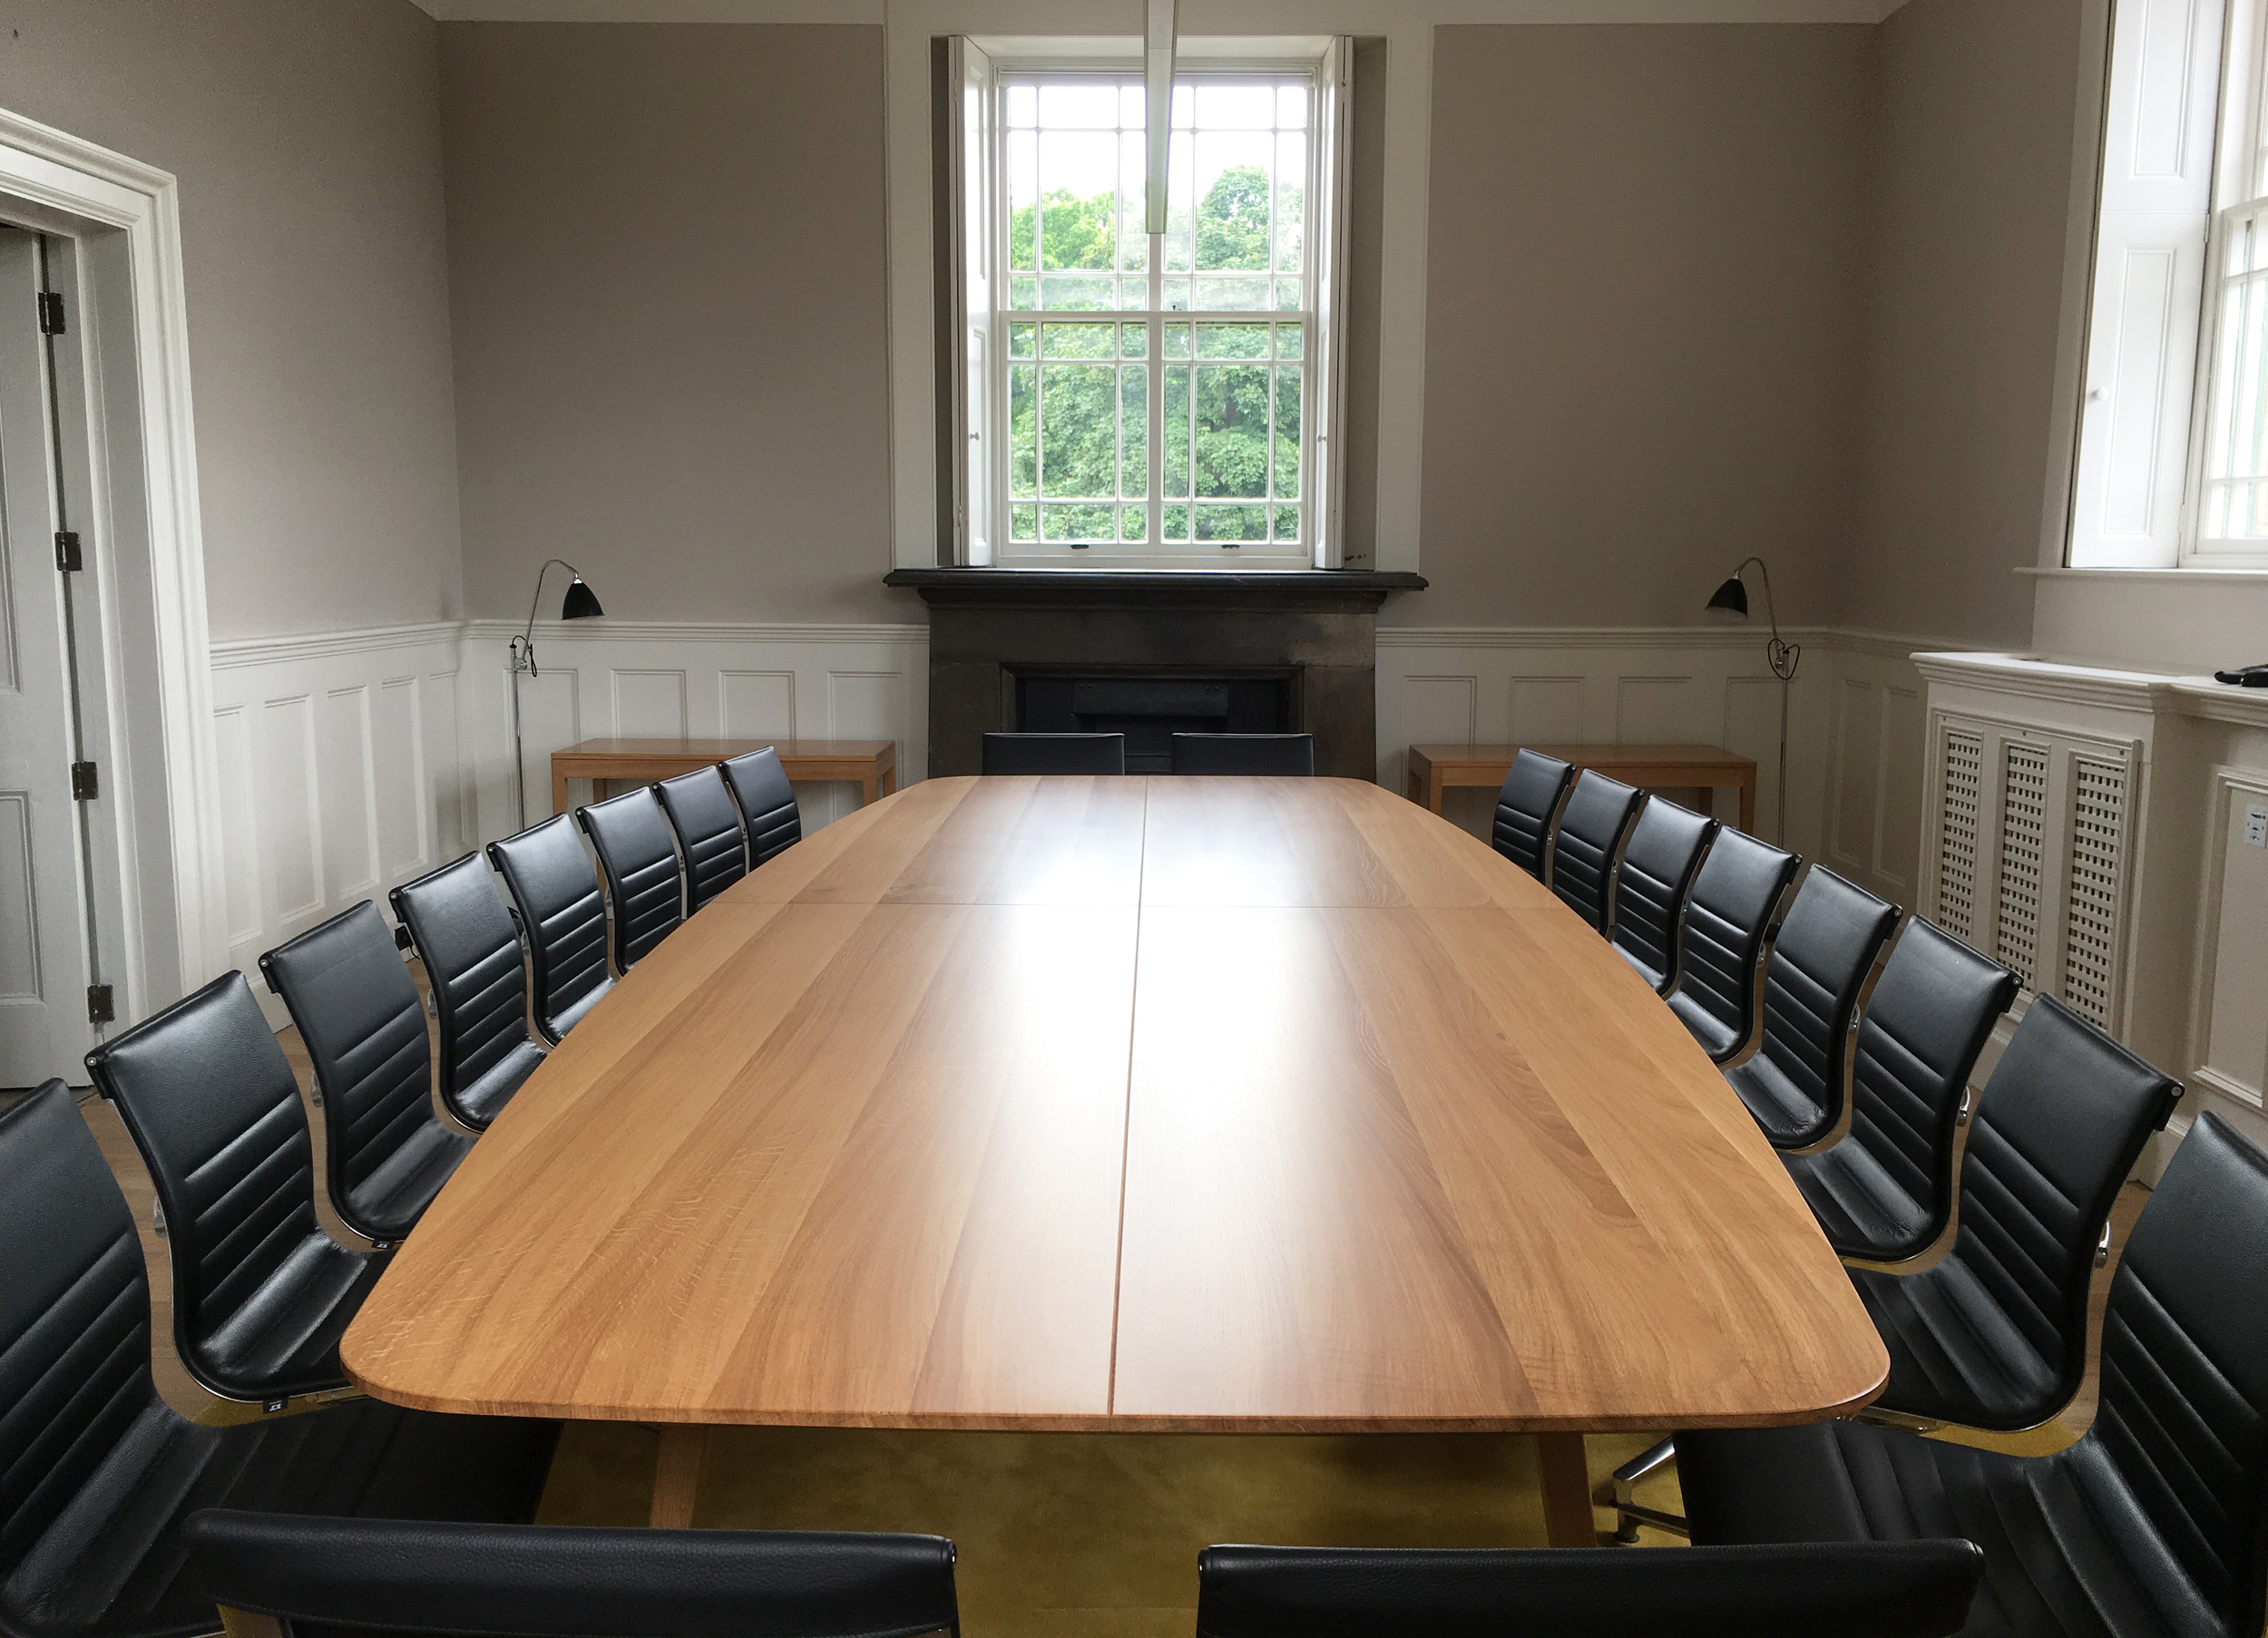 Hand crafted boardroom table by designer maker Namon Gaston